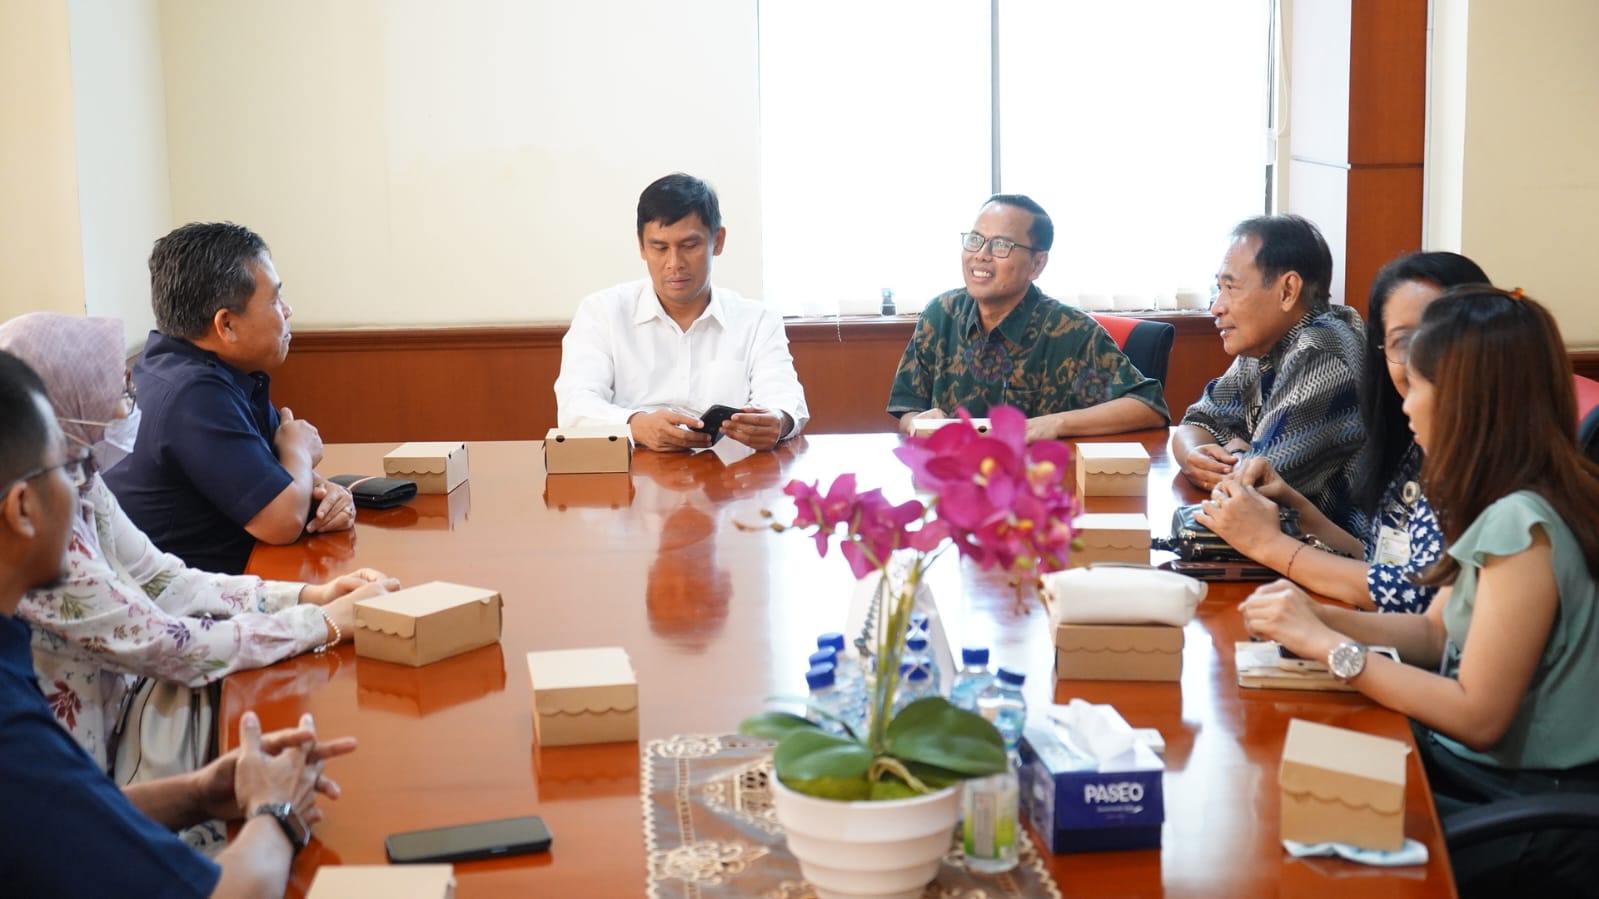 Developing Research in the Field of Stem Cells and Cancer, FK Unud Explores Collaboration with SCCR Semarang